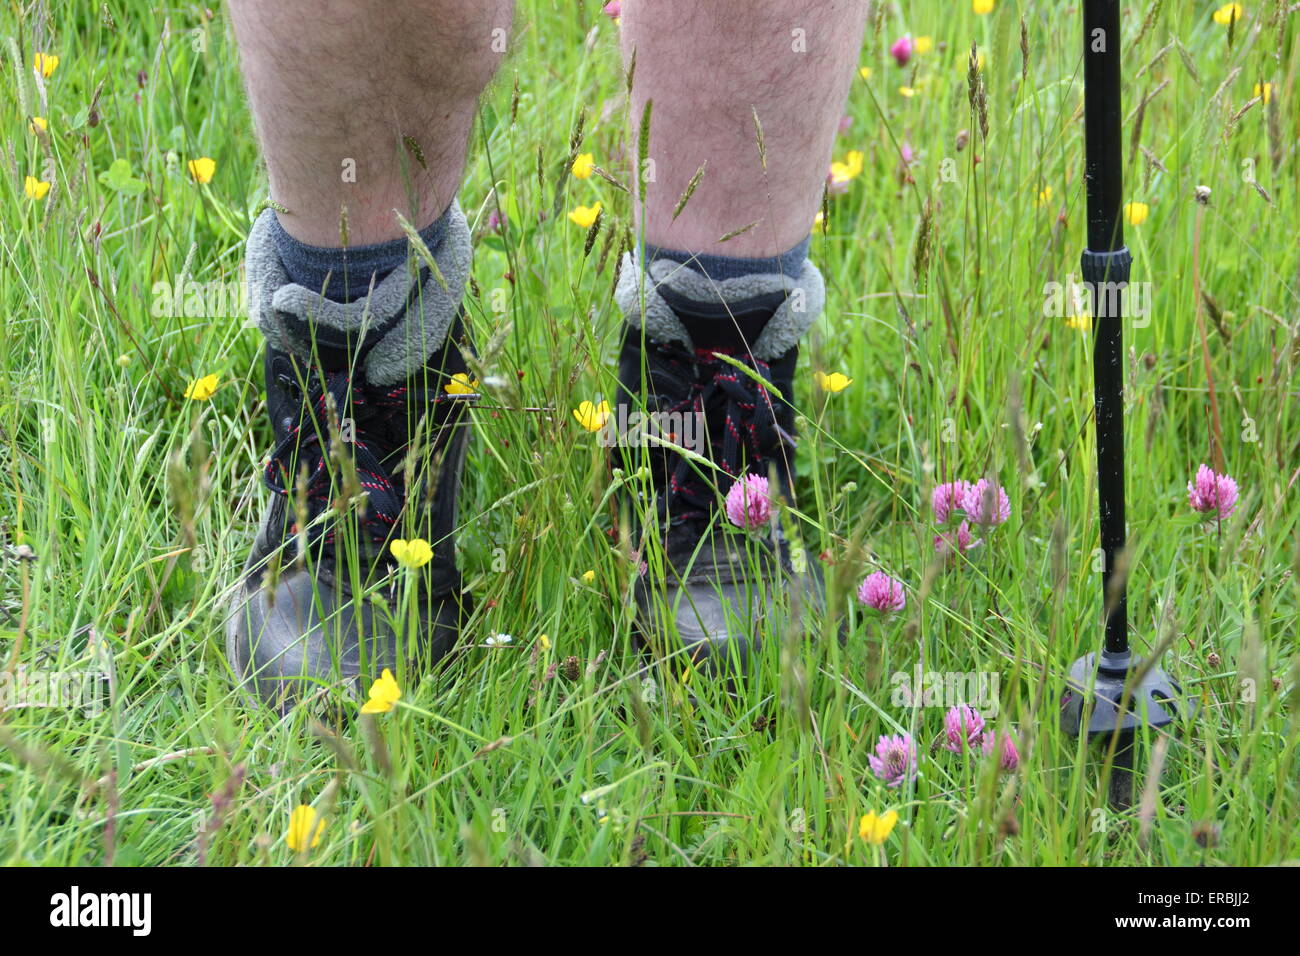 A man walks through a wildflower meadow of buttercups, grasses and clover, Derbyshire, Britain, UK - May Stock Photo